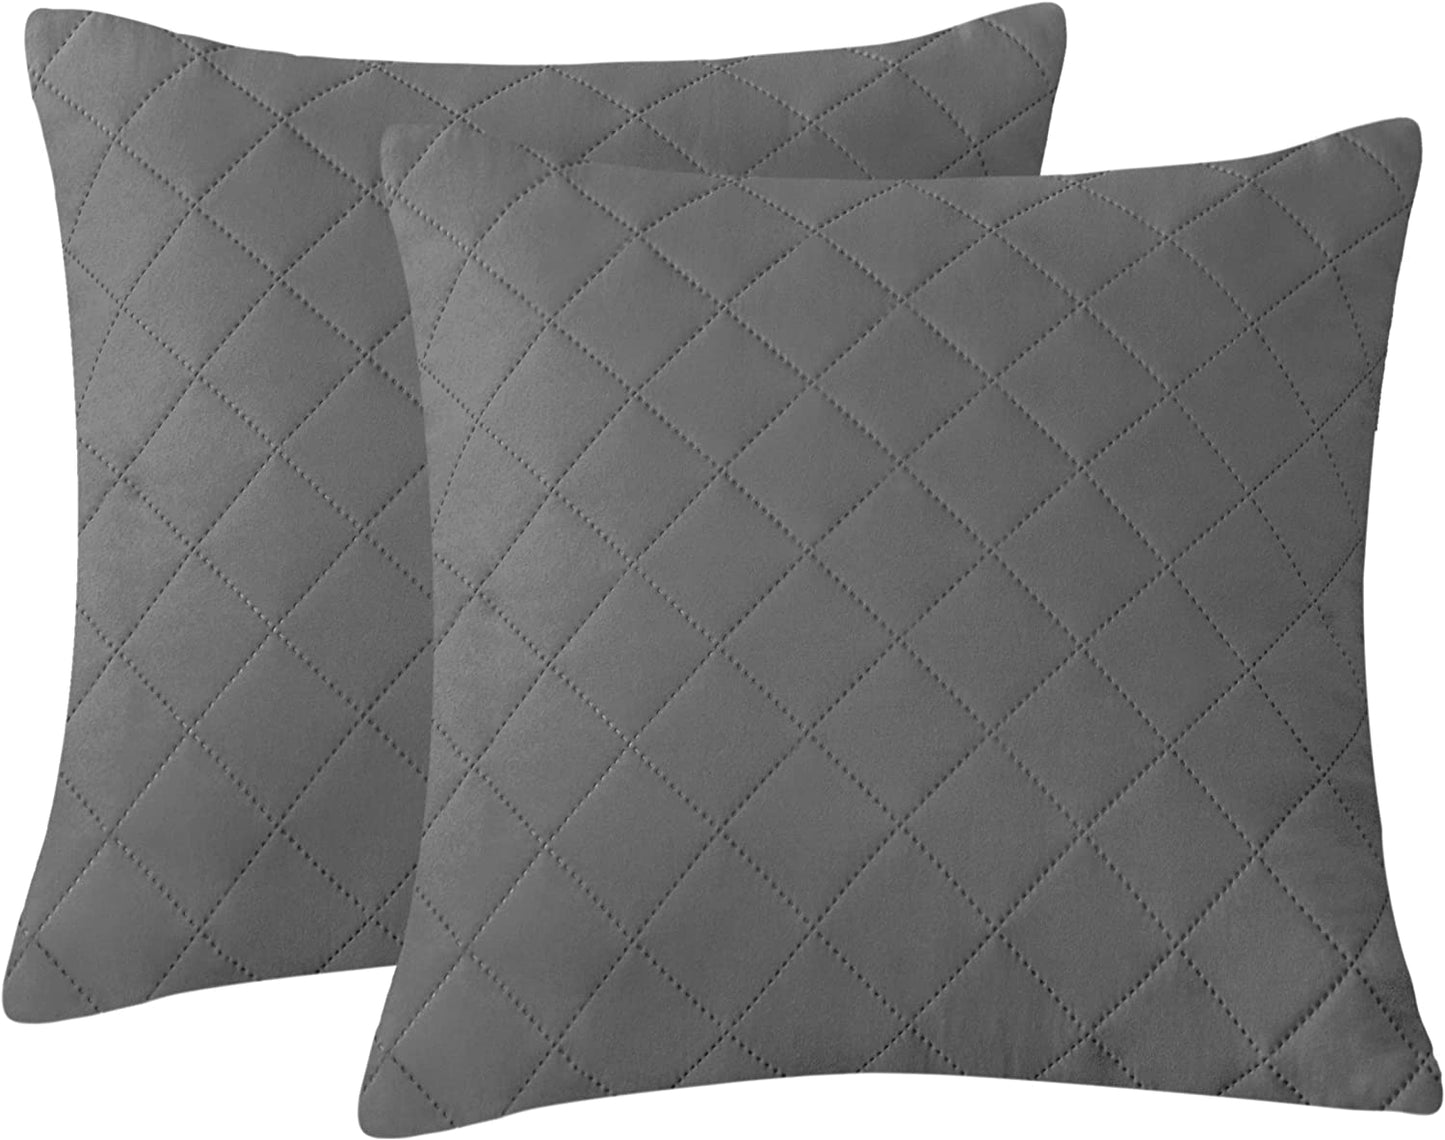 QUILTED CUSHION COVER SQUARE PATTERN 16 X 16 INCHES - LIGHT GREY